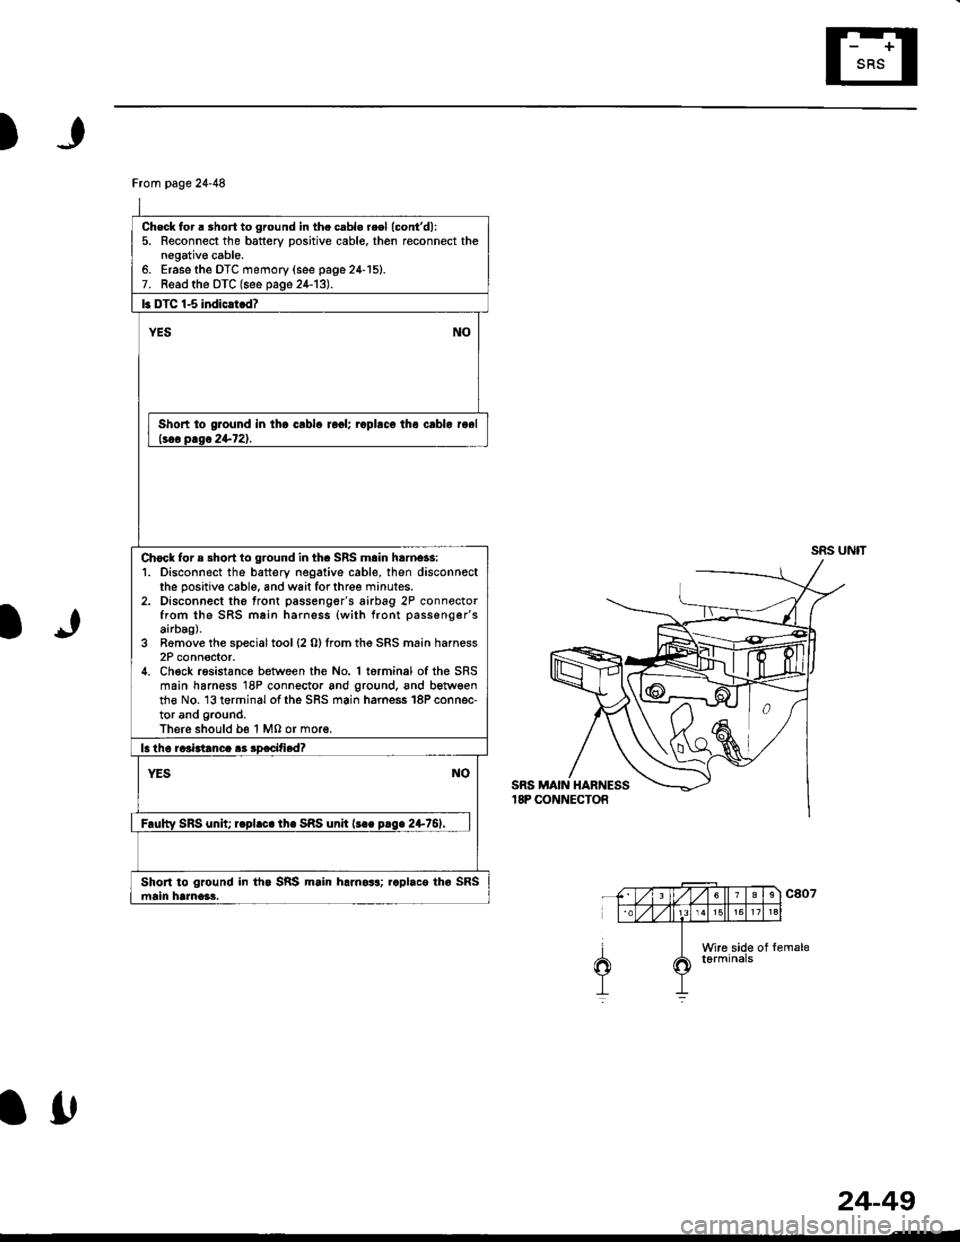 HONDA CIVIC 1996 6.G Service Manual )
TJ
From page 24-48
Check for a ahort to ground in th. cabl. r.el (contd):
5. Reconnect the battery positive cable, then reconnect thenagativ€ cable.6. Erase the DTC memory (see page 24-15).7. Rea